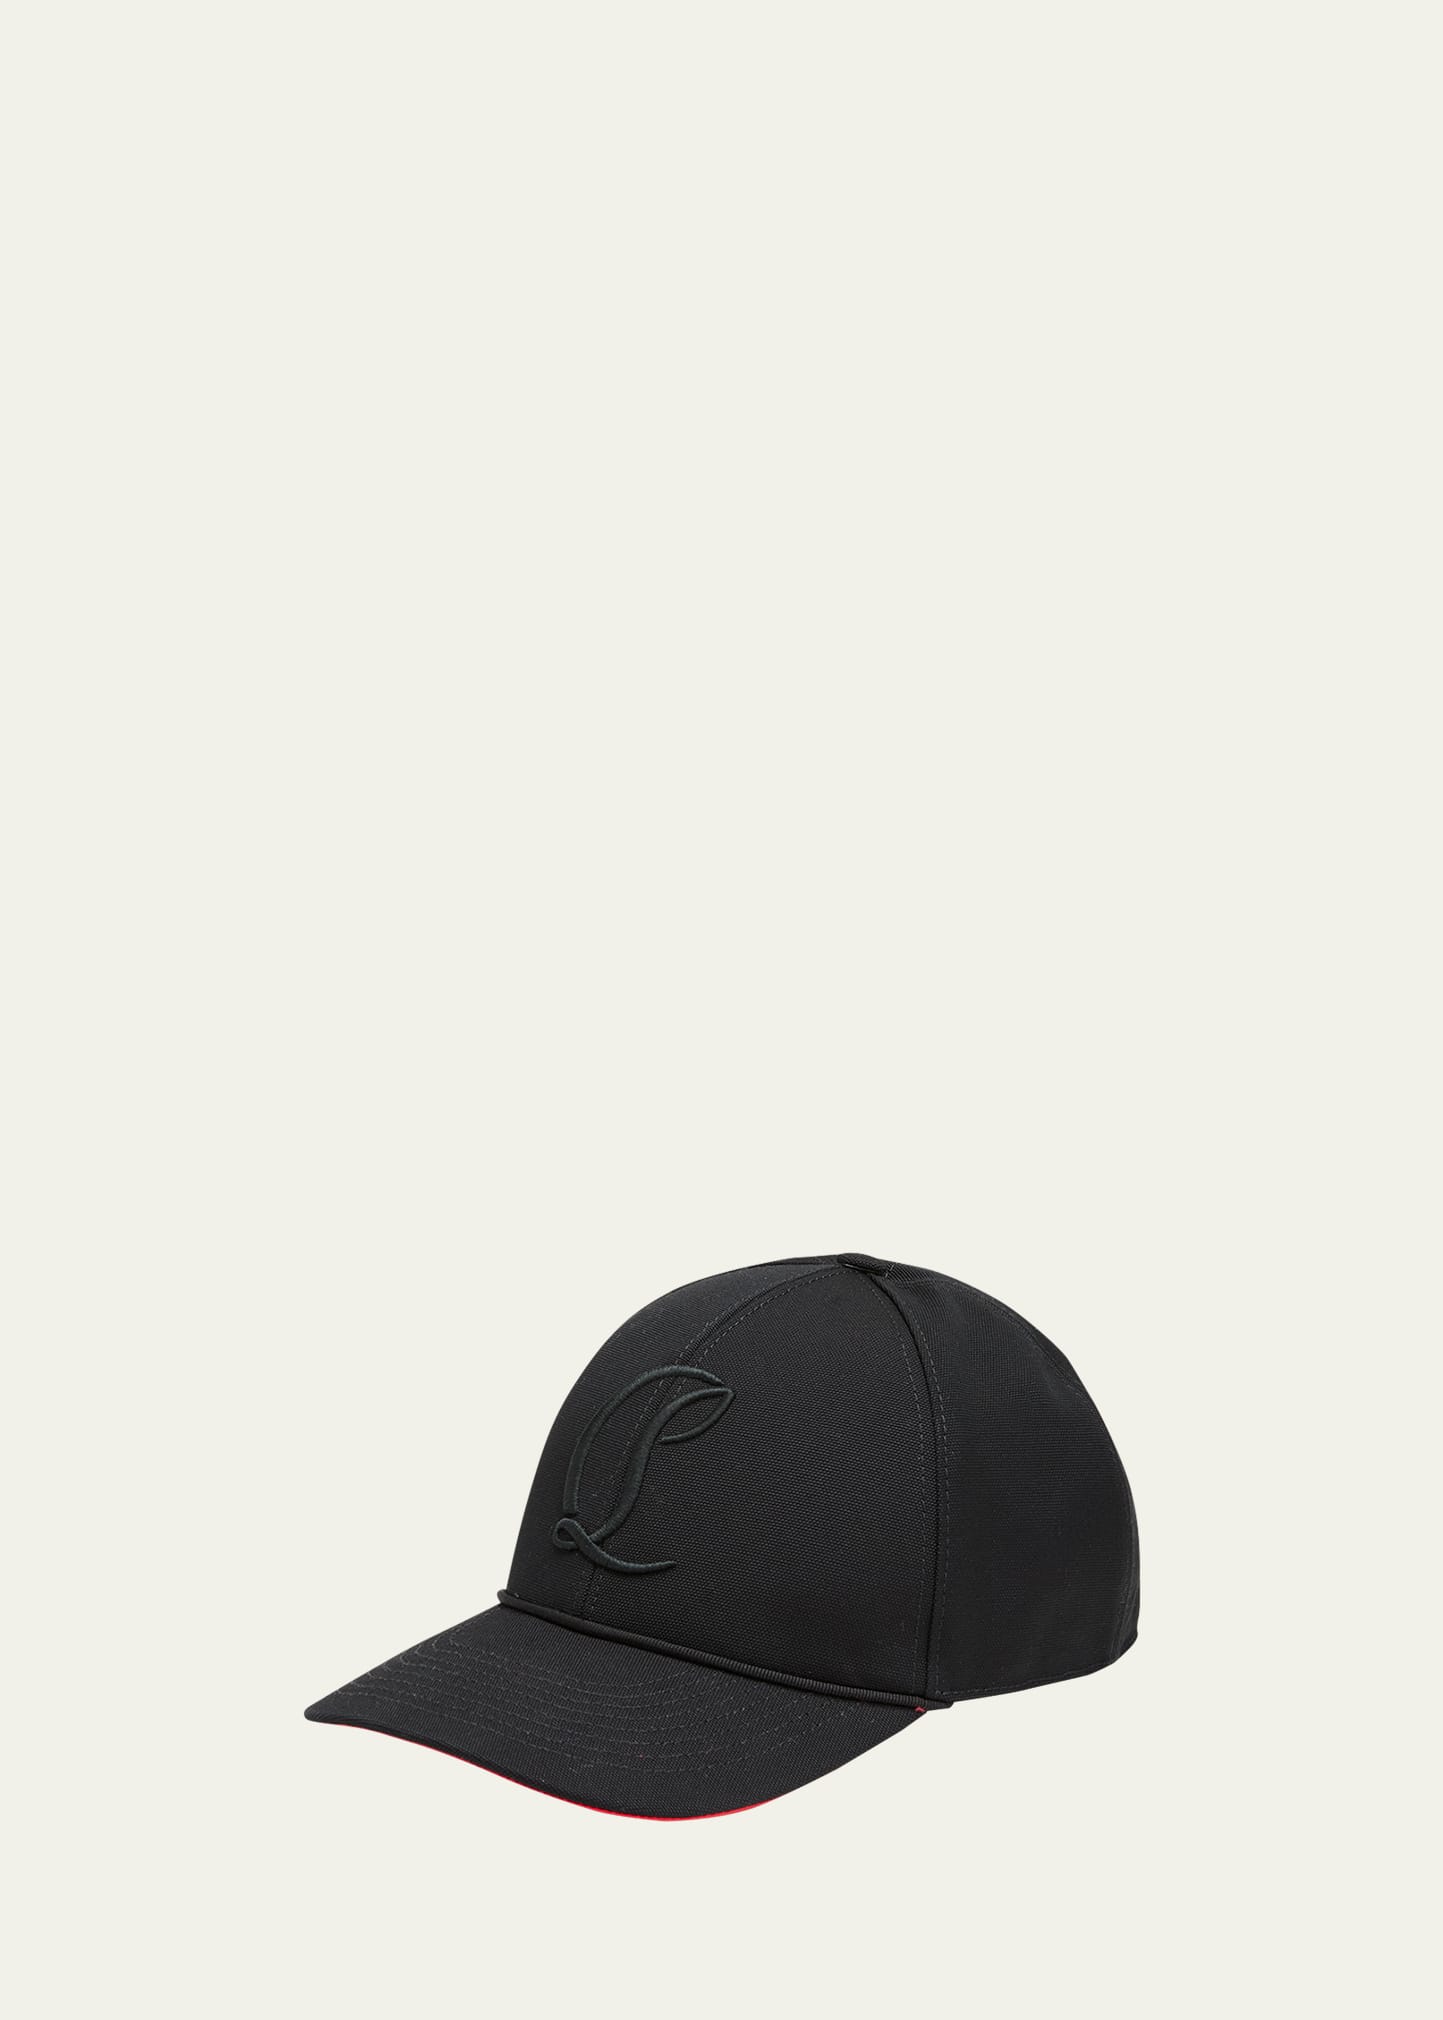 Christian Louboutin Men's Mooncrest Embroidered Baseball Hat In Black/silver